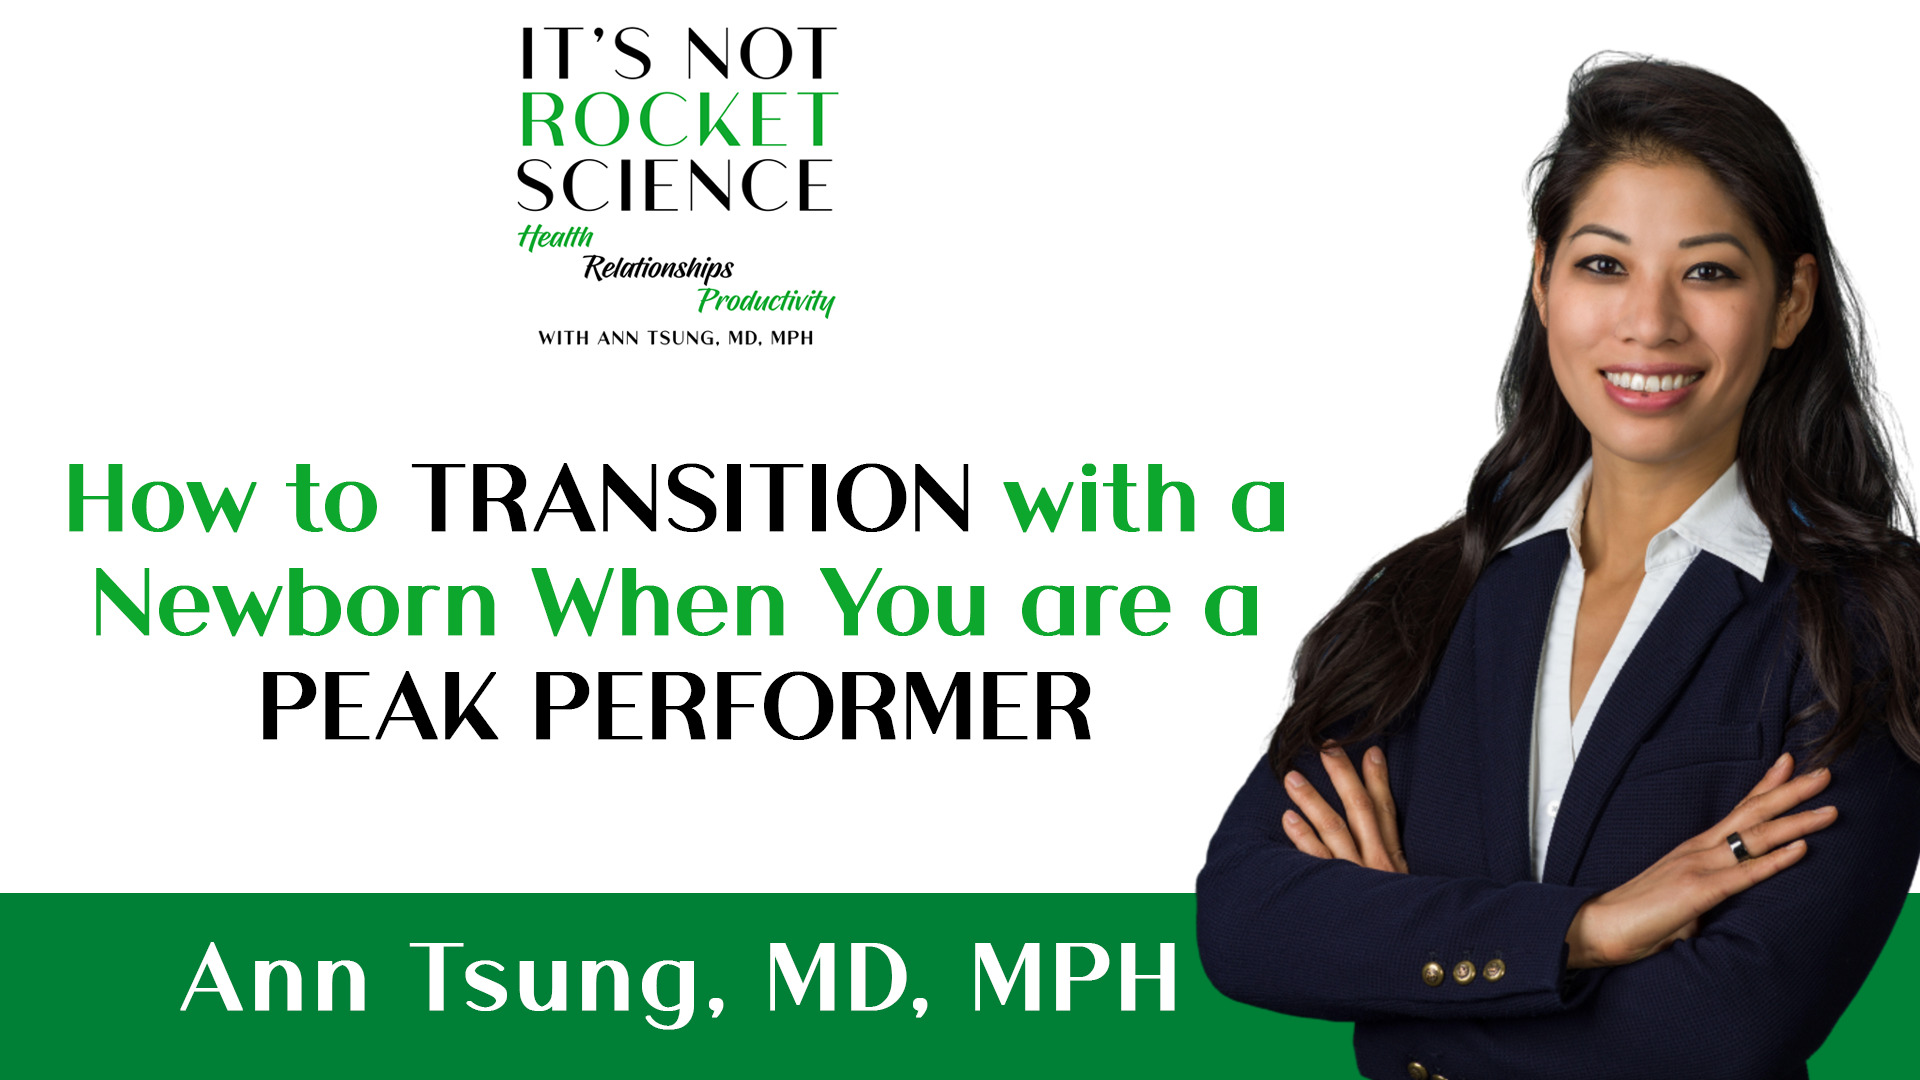 048. How to TRANSITION with a Newborn When You are a PEAK PERFORMER